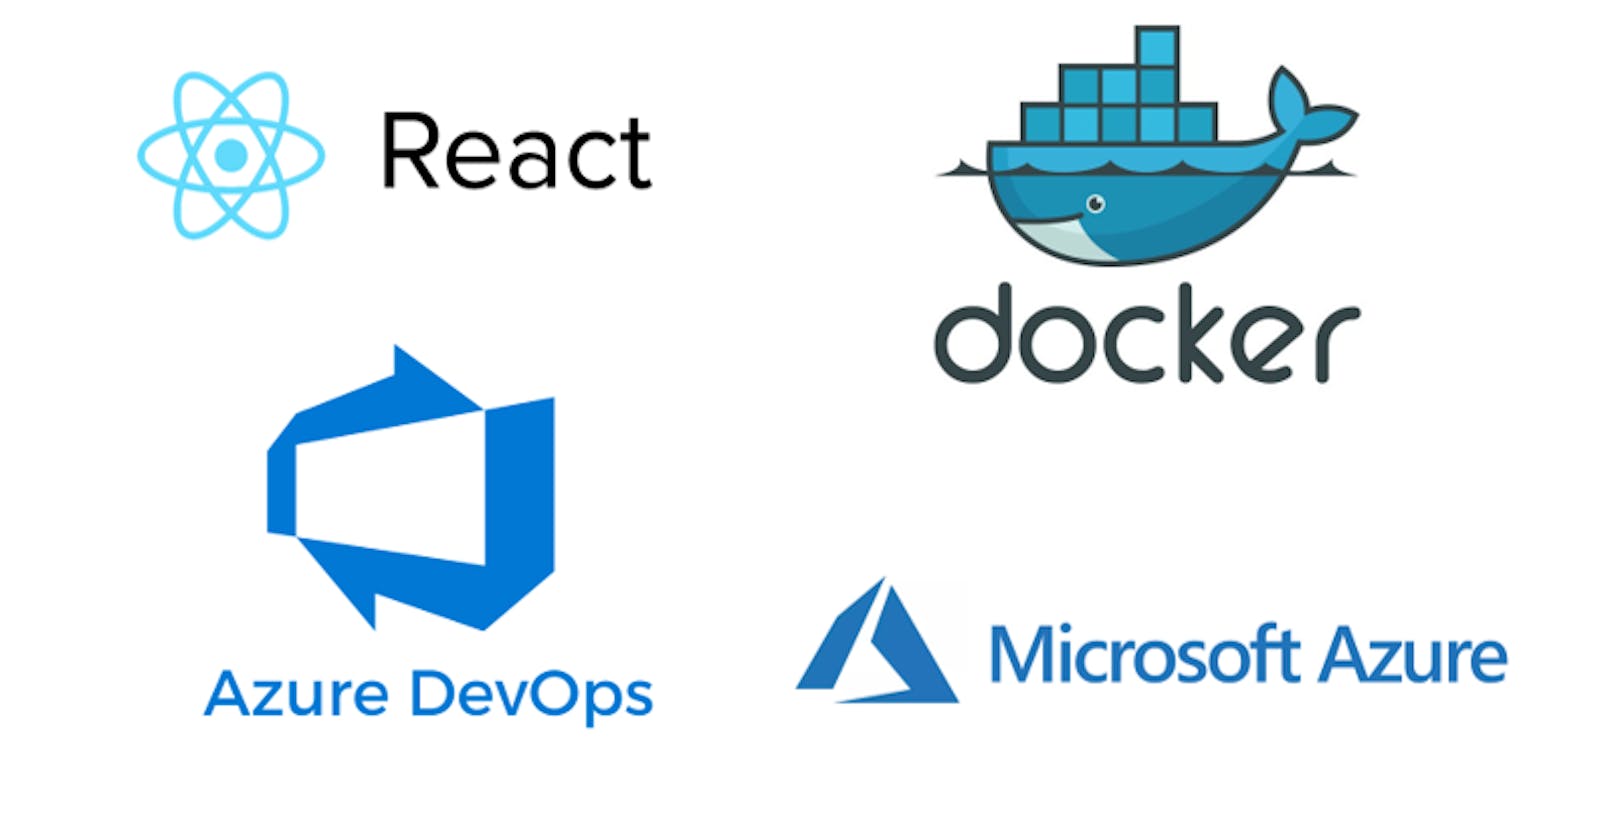 How to deploy react app as a container app in azure?